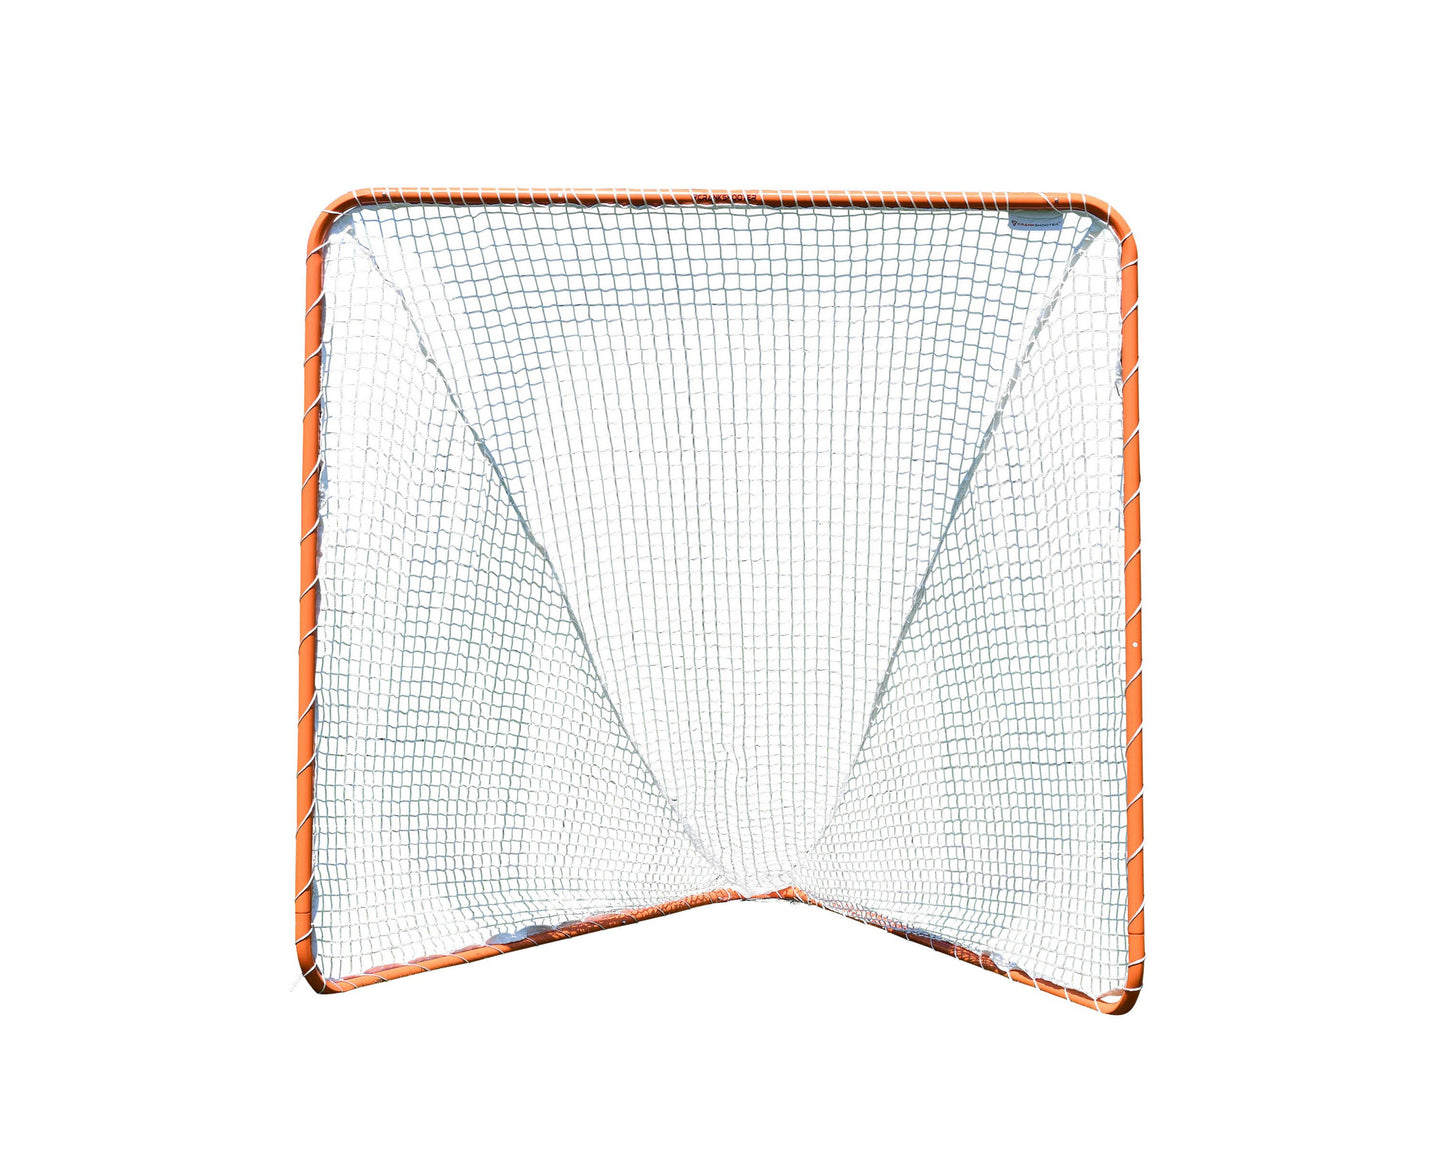 Backyard/Youth Practice Lacrosse Goal & 4mm Net COMBO Practice Goal  6'x6'x7' by CrankShooter® 21 lbs - INCLUDES TOUGH 4MM White Net - Free Shipping